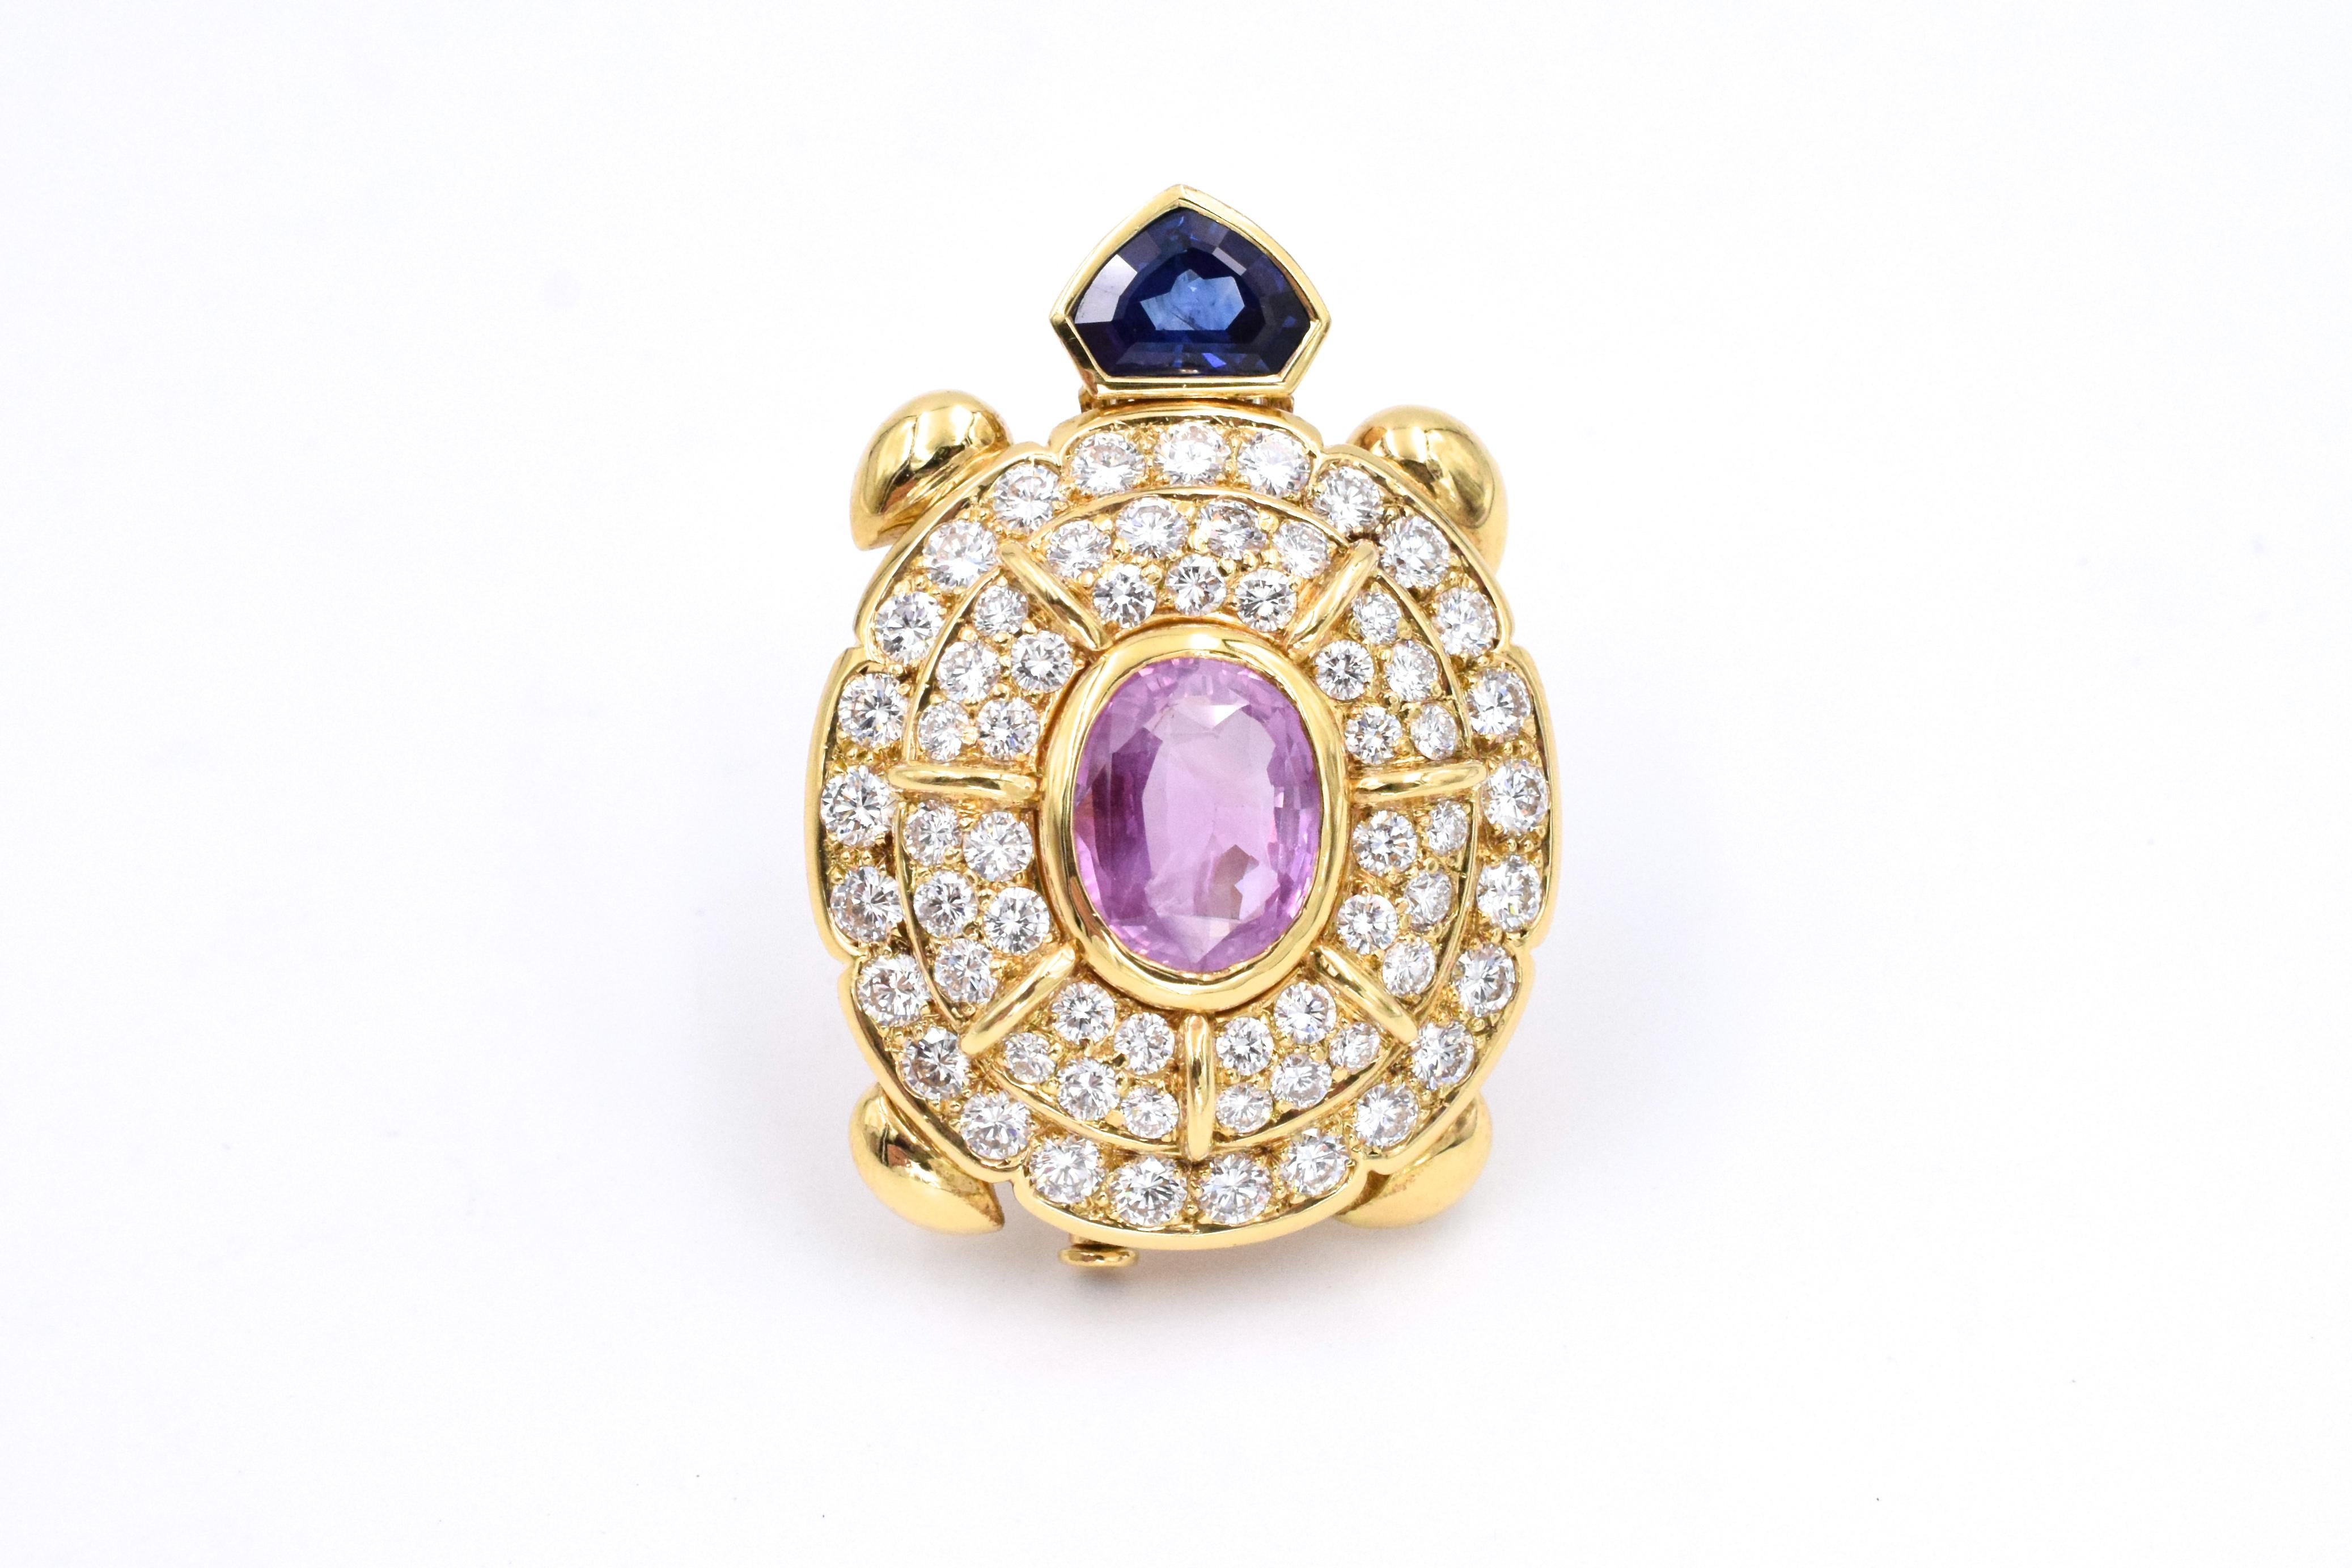 Beautiful pink & blue sapphire with diamonds turtle brooch.
The brooch is composed of:
Oval shape pink sapphire weighs 6.50carat
Blue sapphire, weighs 1.50carat
Brilliant cut diamonds, weigh approximately 4.40carat
Set in 18k yellow gold.